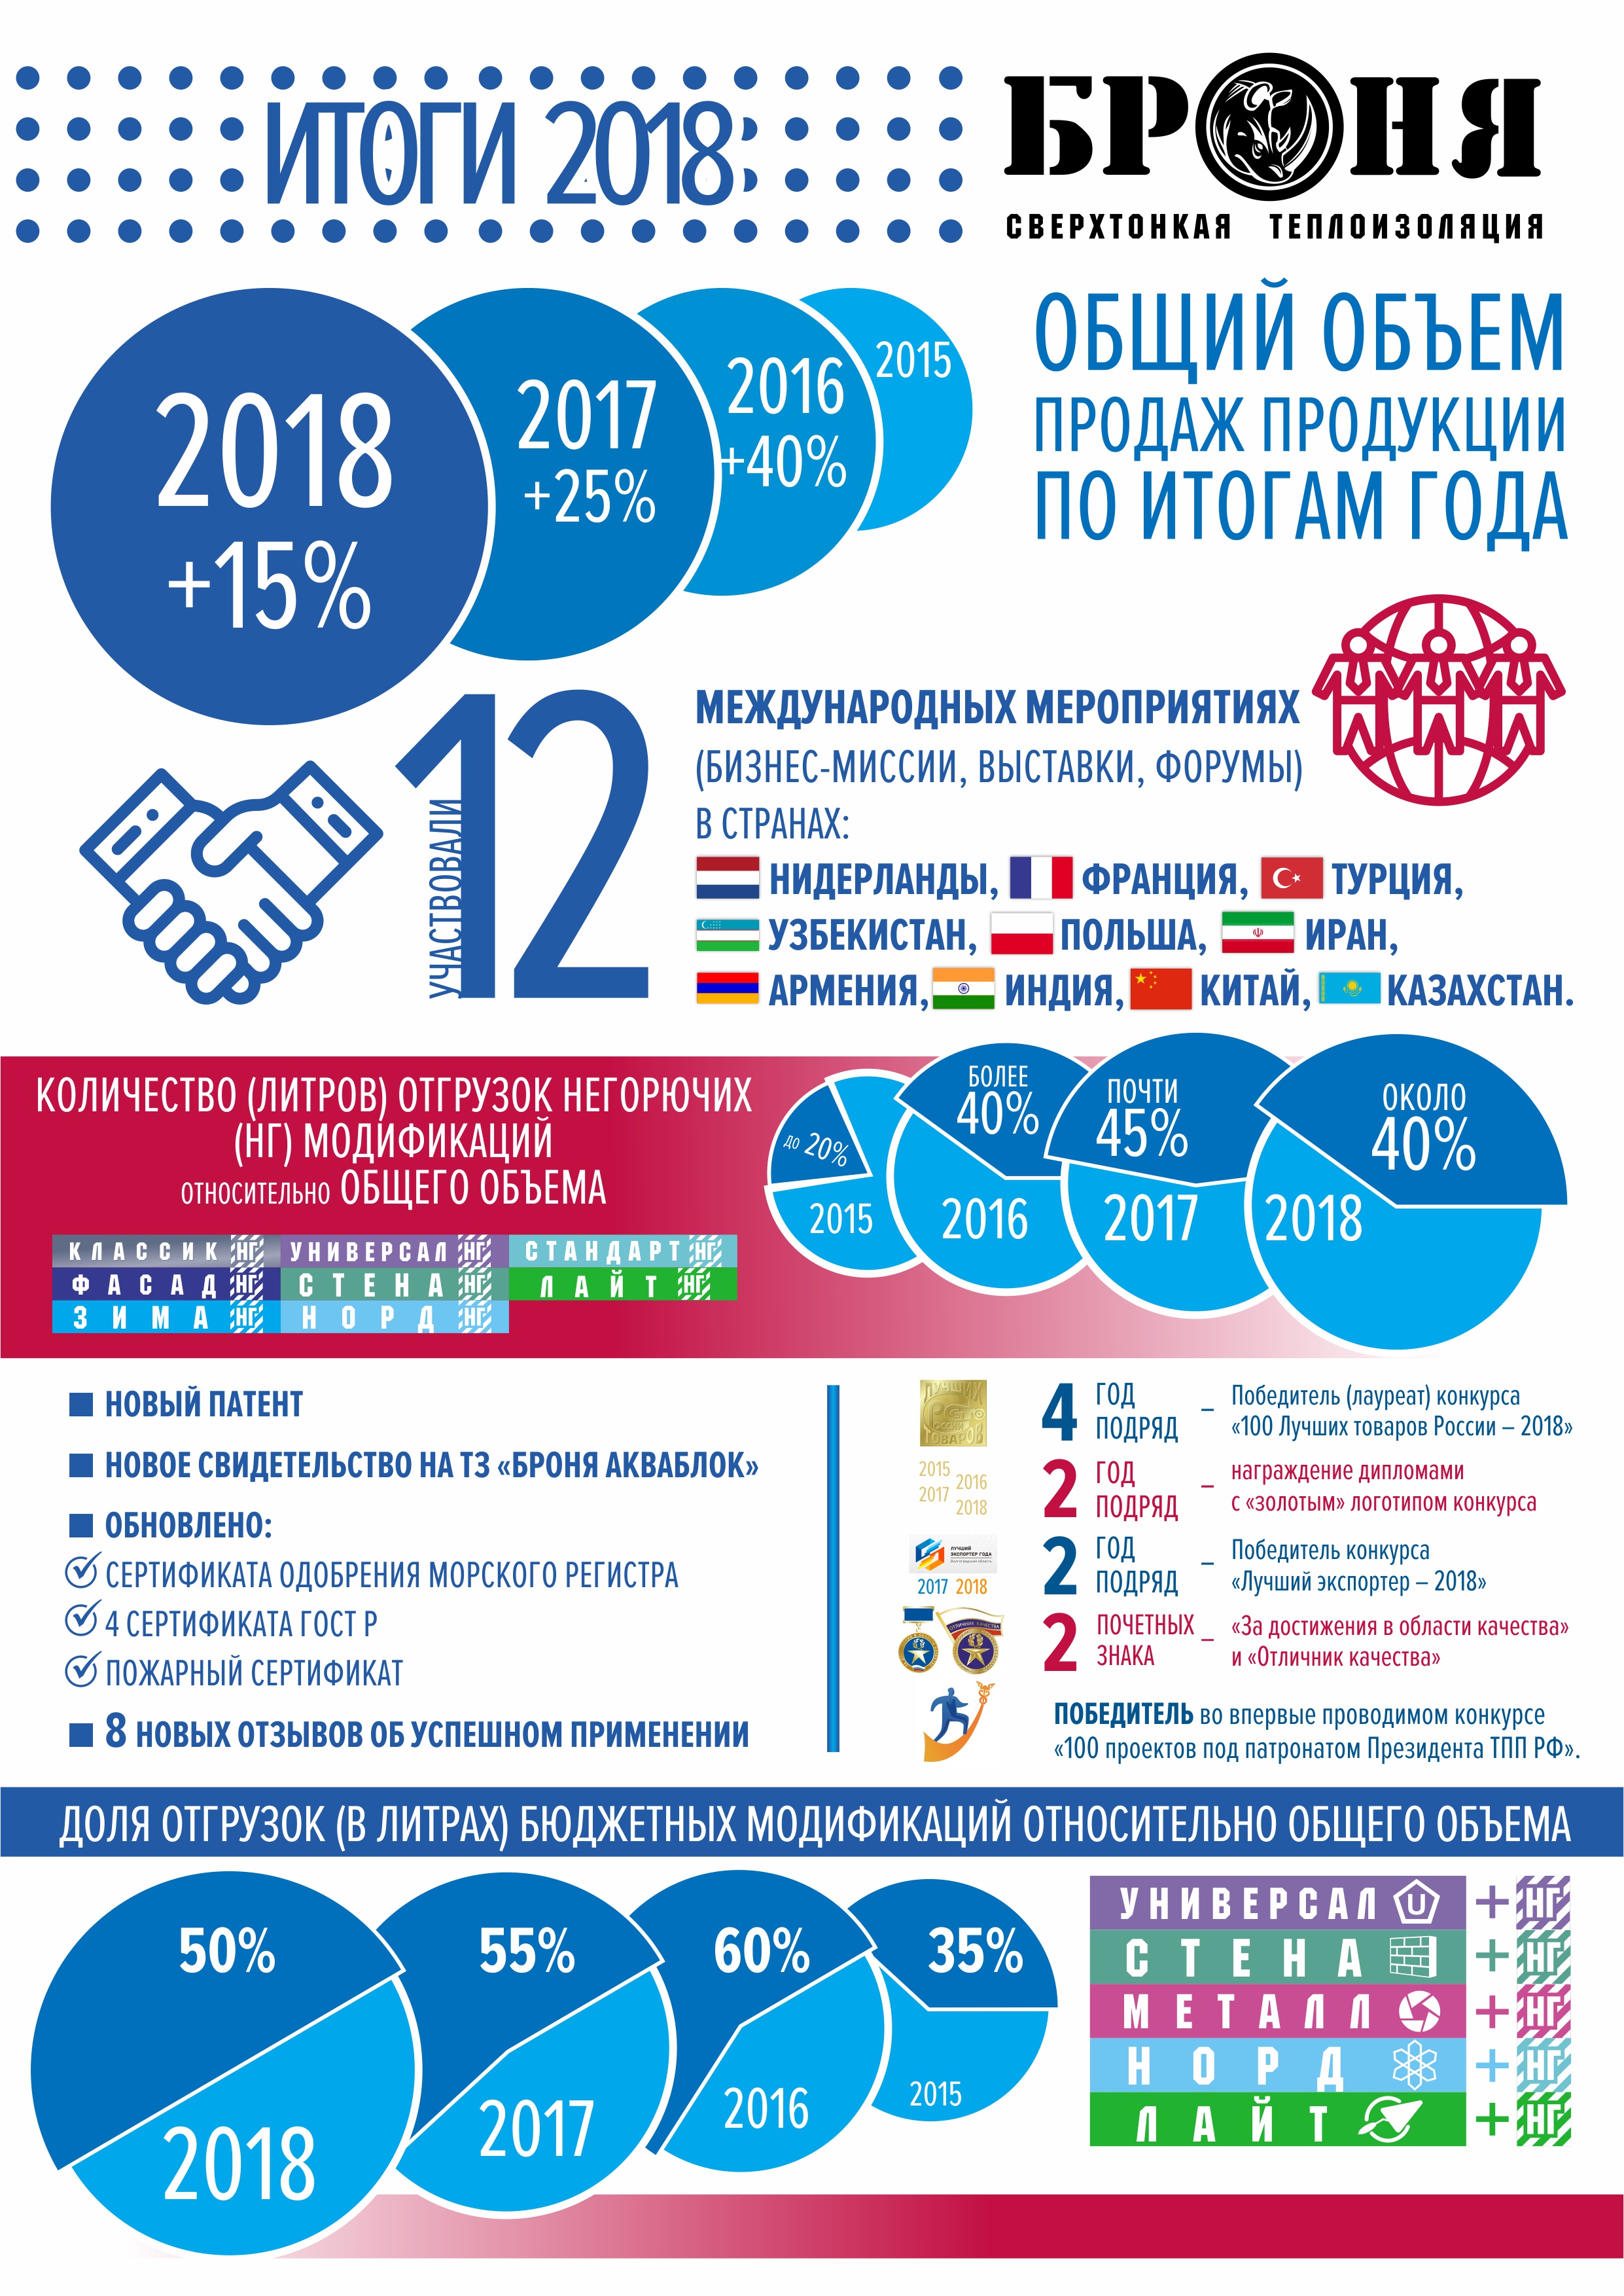 Results of the outgoing 2018 (INFOgraphics)